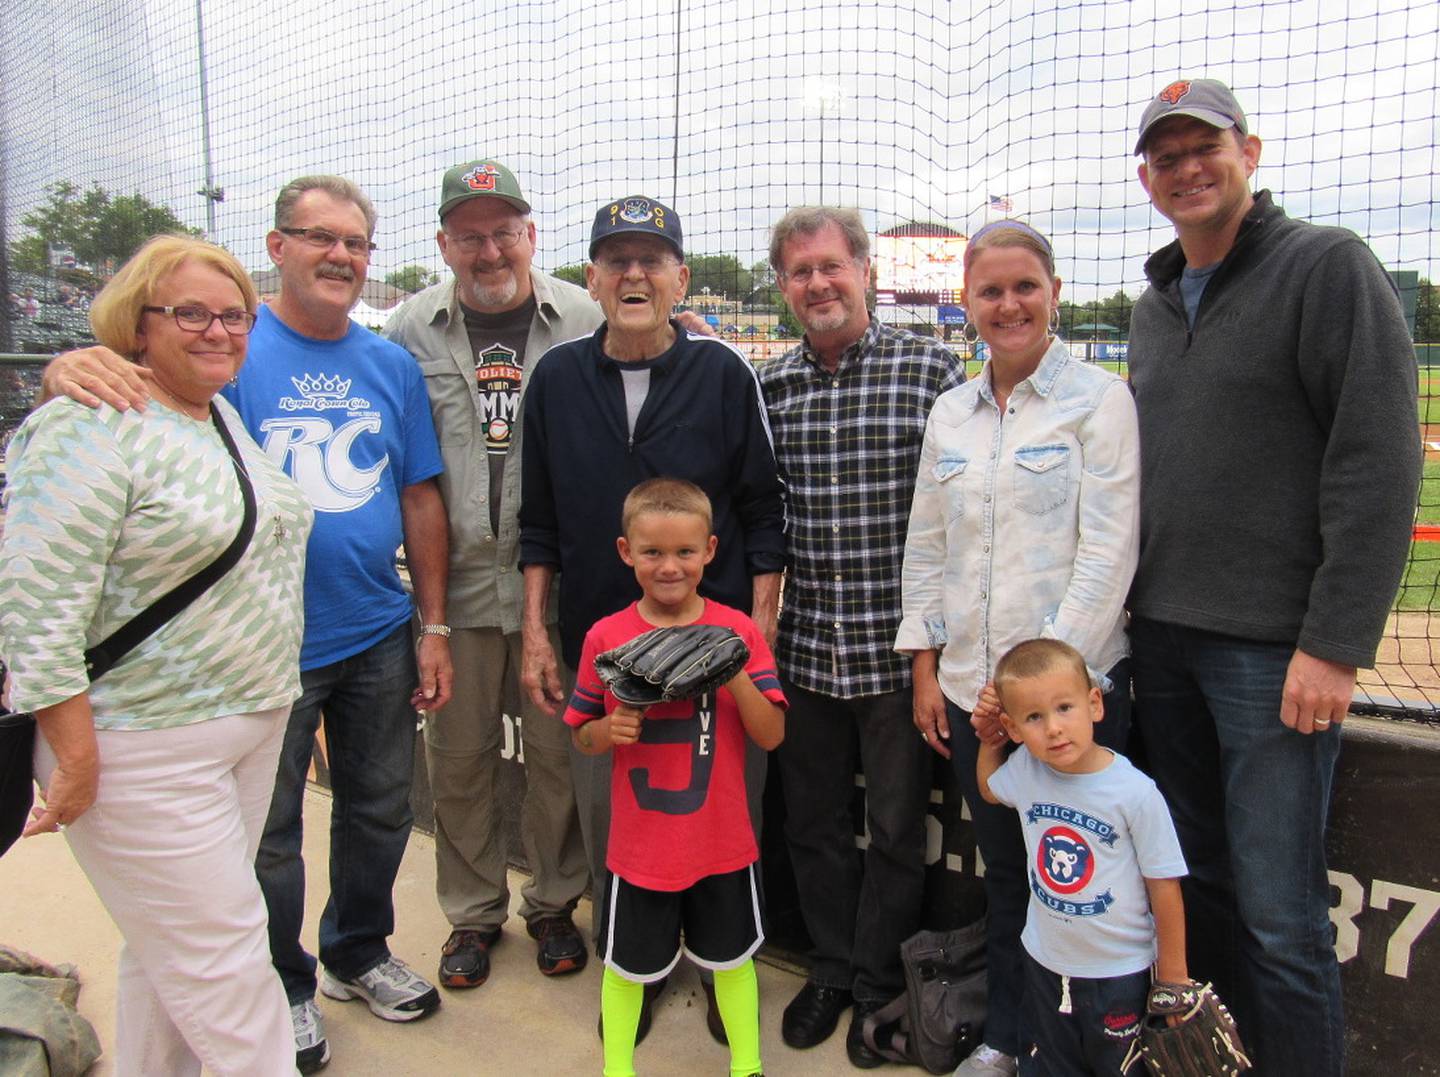 Cheering Glenn Masek on at the Slammers game were daughter-in-law Pat, son Rick, son Mark, Glenn, son Terry, granddaughter Carrie, grandson-in-law John Larson, and, in the front, great-grandsons Jay and Ty Larson.